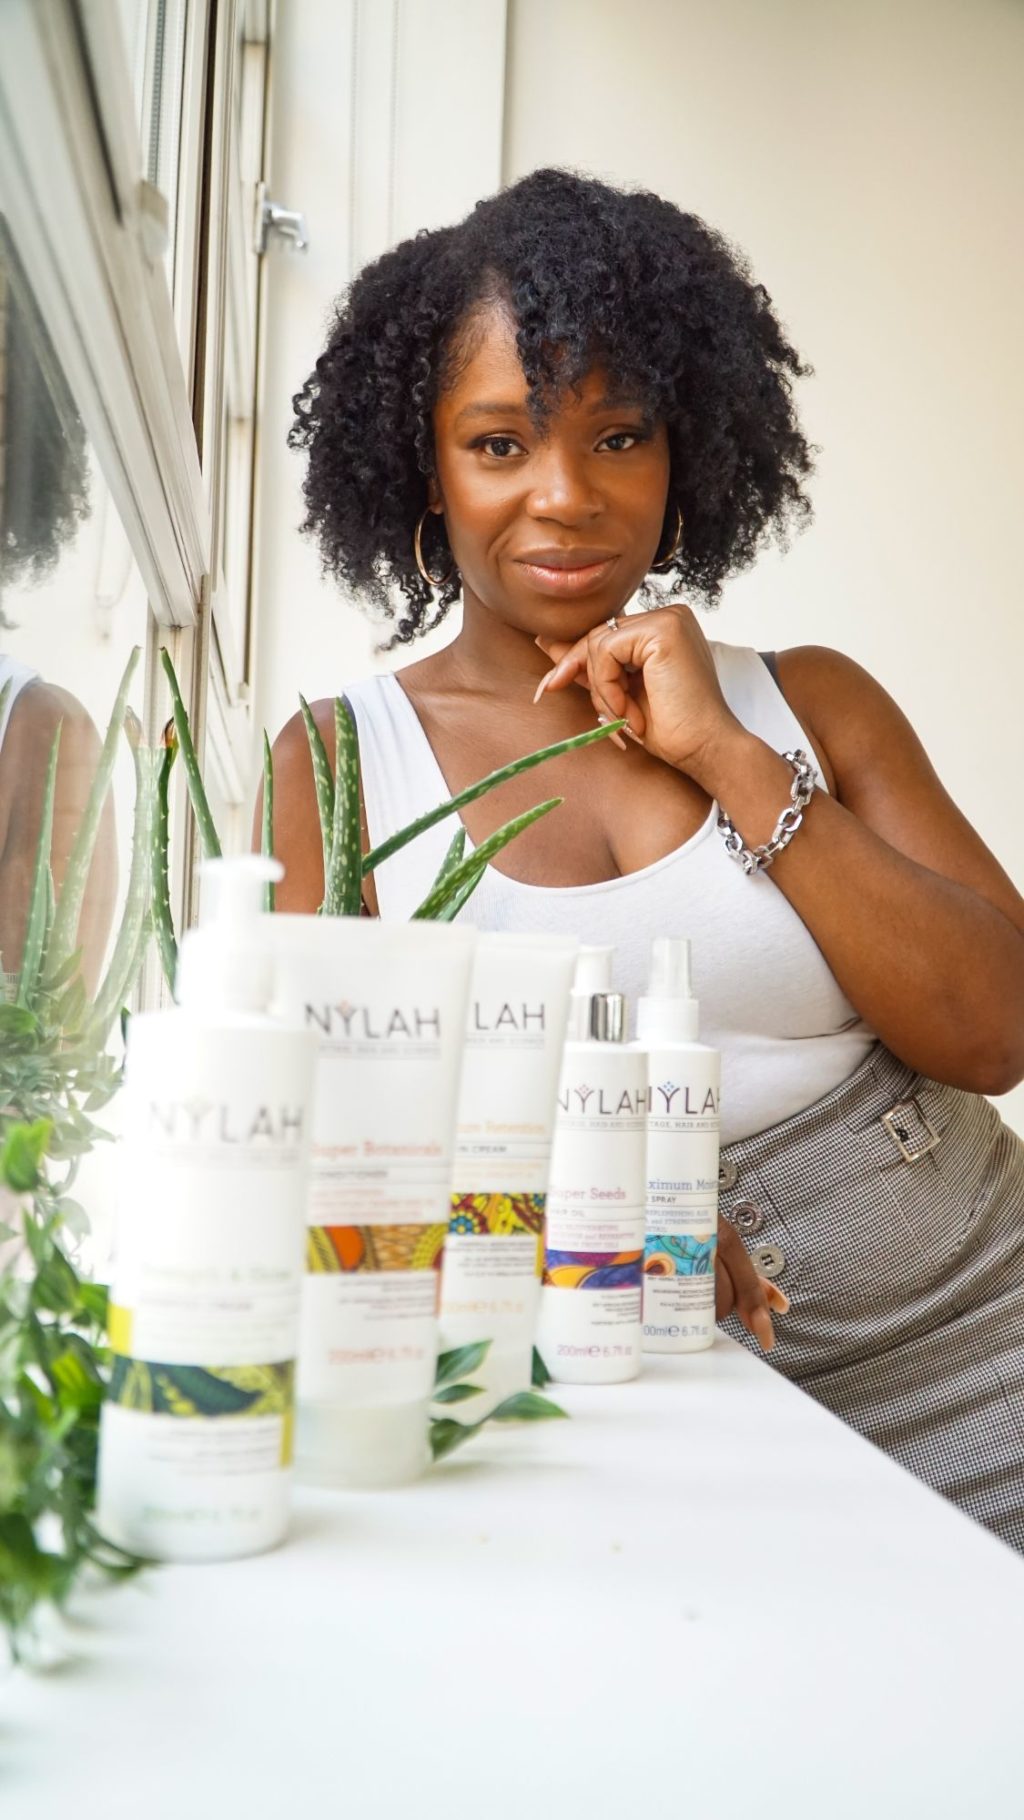 Vegan Black Haircare; Embrace Your Natural Hair With Nylah's Naturals